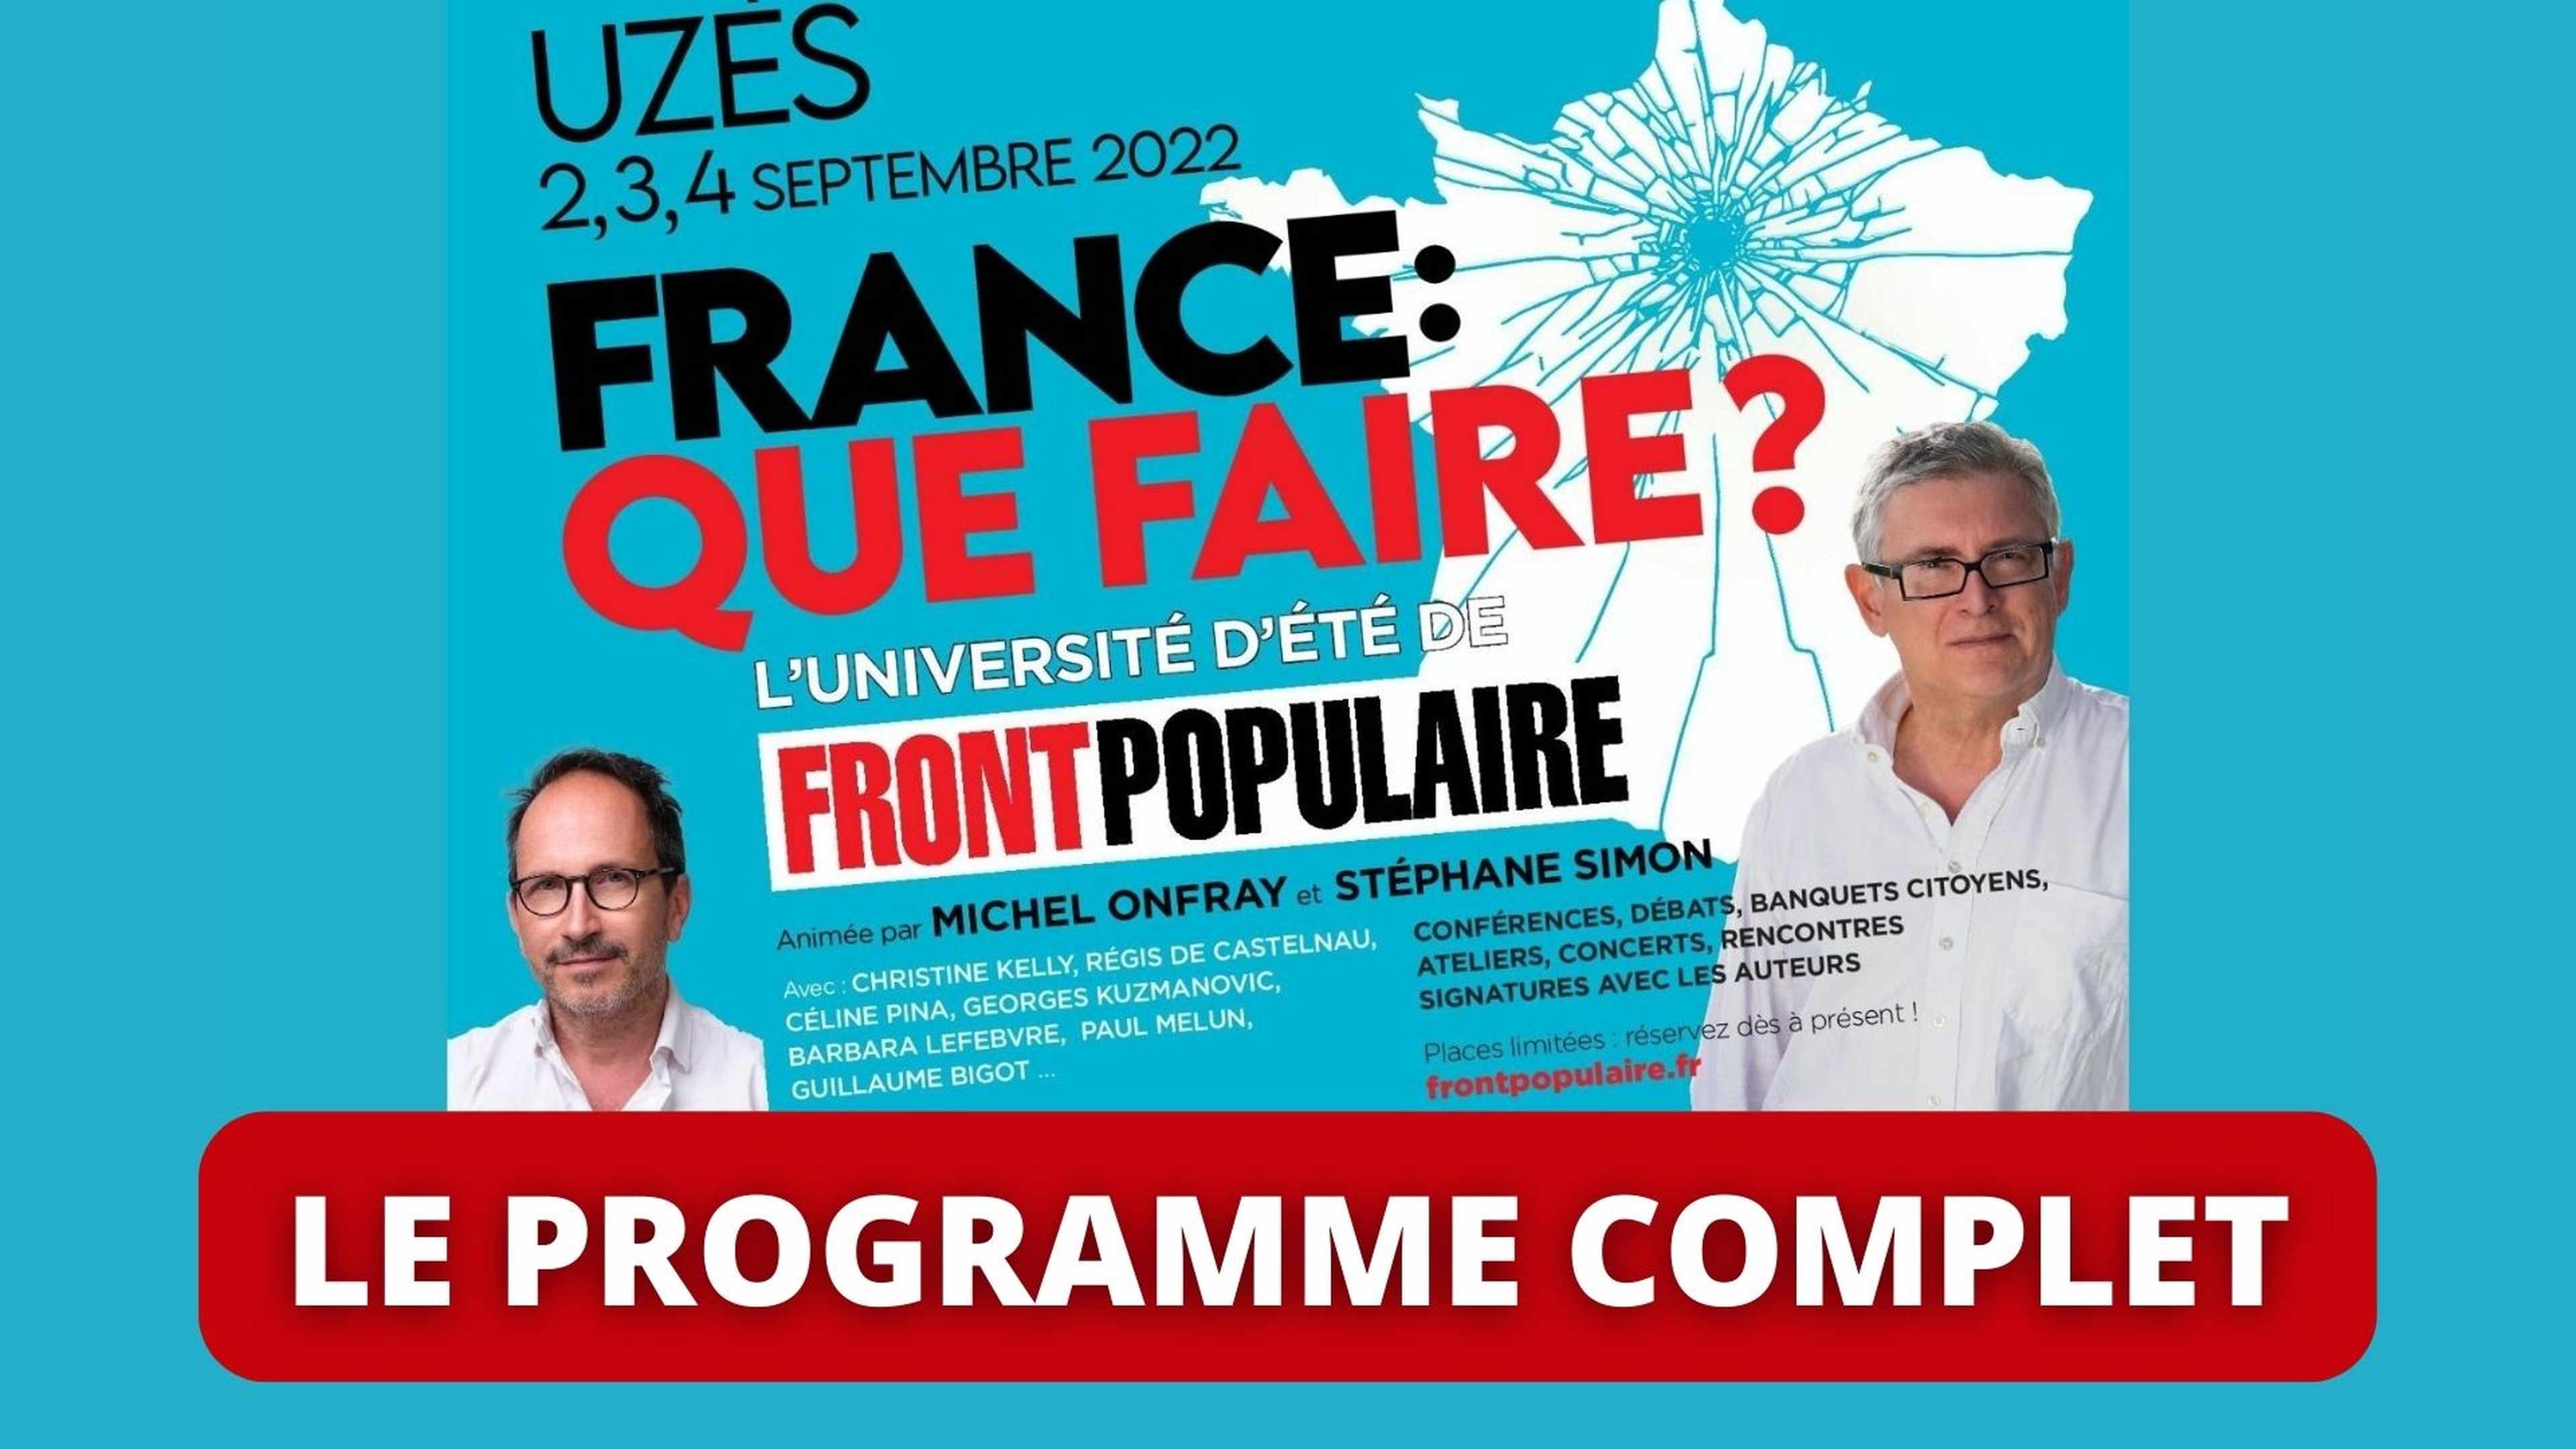 /2022/08/UZES-FRONT-POPULAIRE-ONFRAY-PROGRAMME-COMPLET